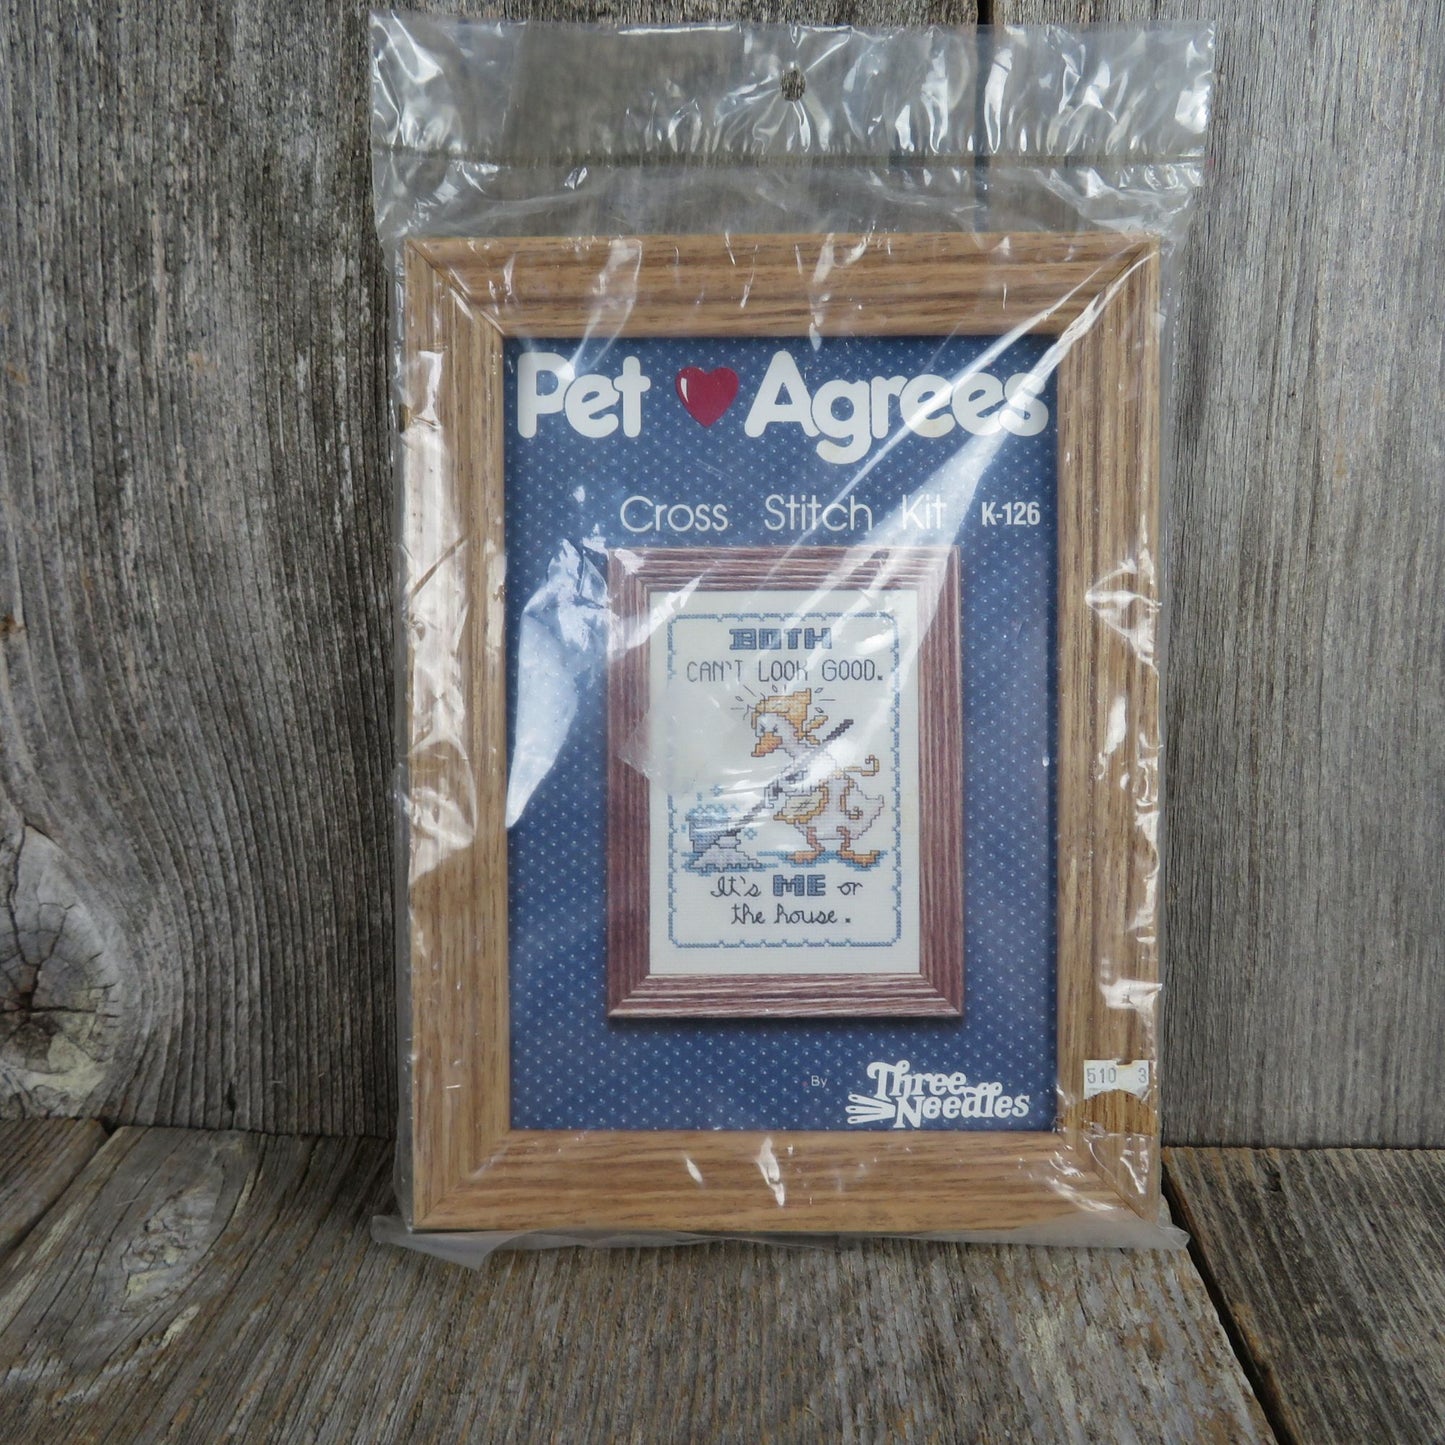 Funny Quote Counted Cross Stitch Kit Both Can't Look Good It's Me or the House Framed Kit Three Needles Pet Agrees